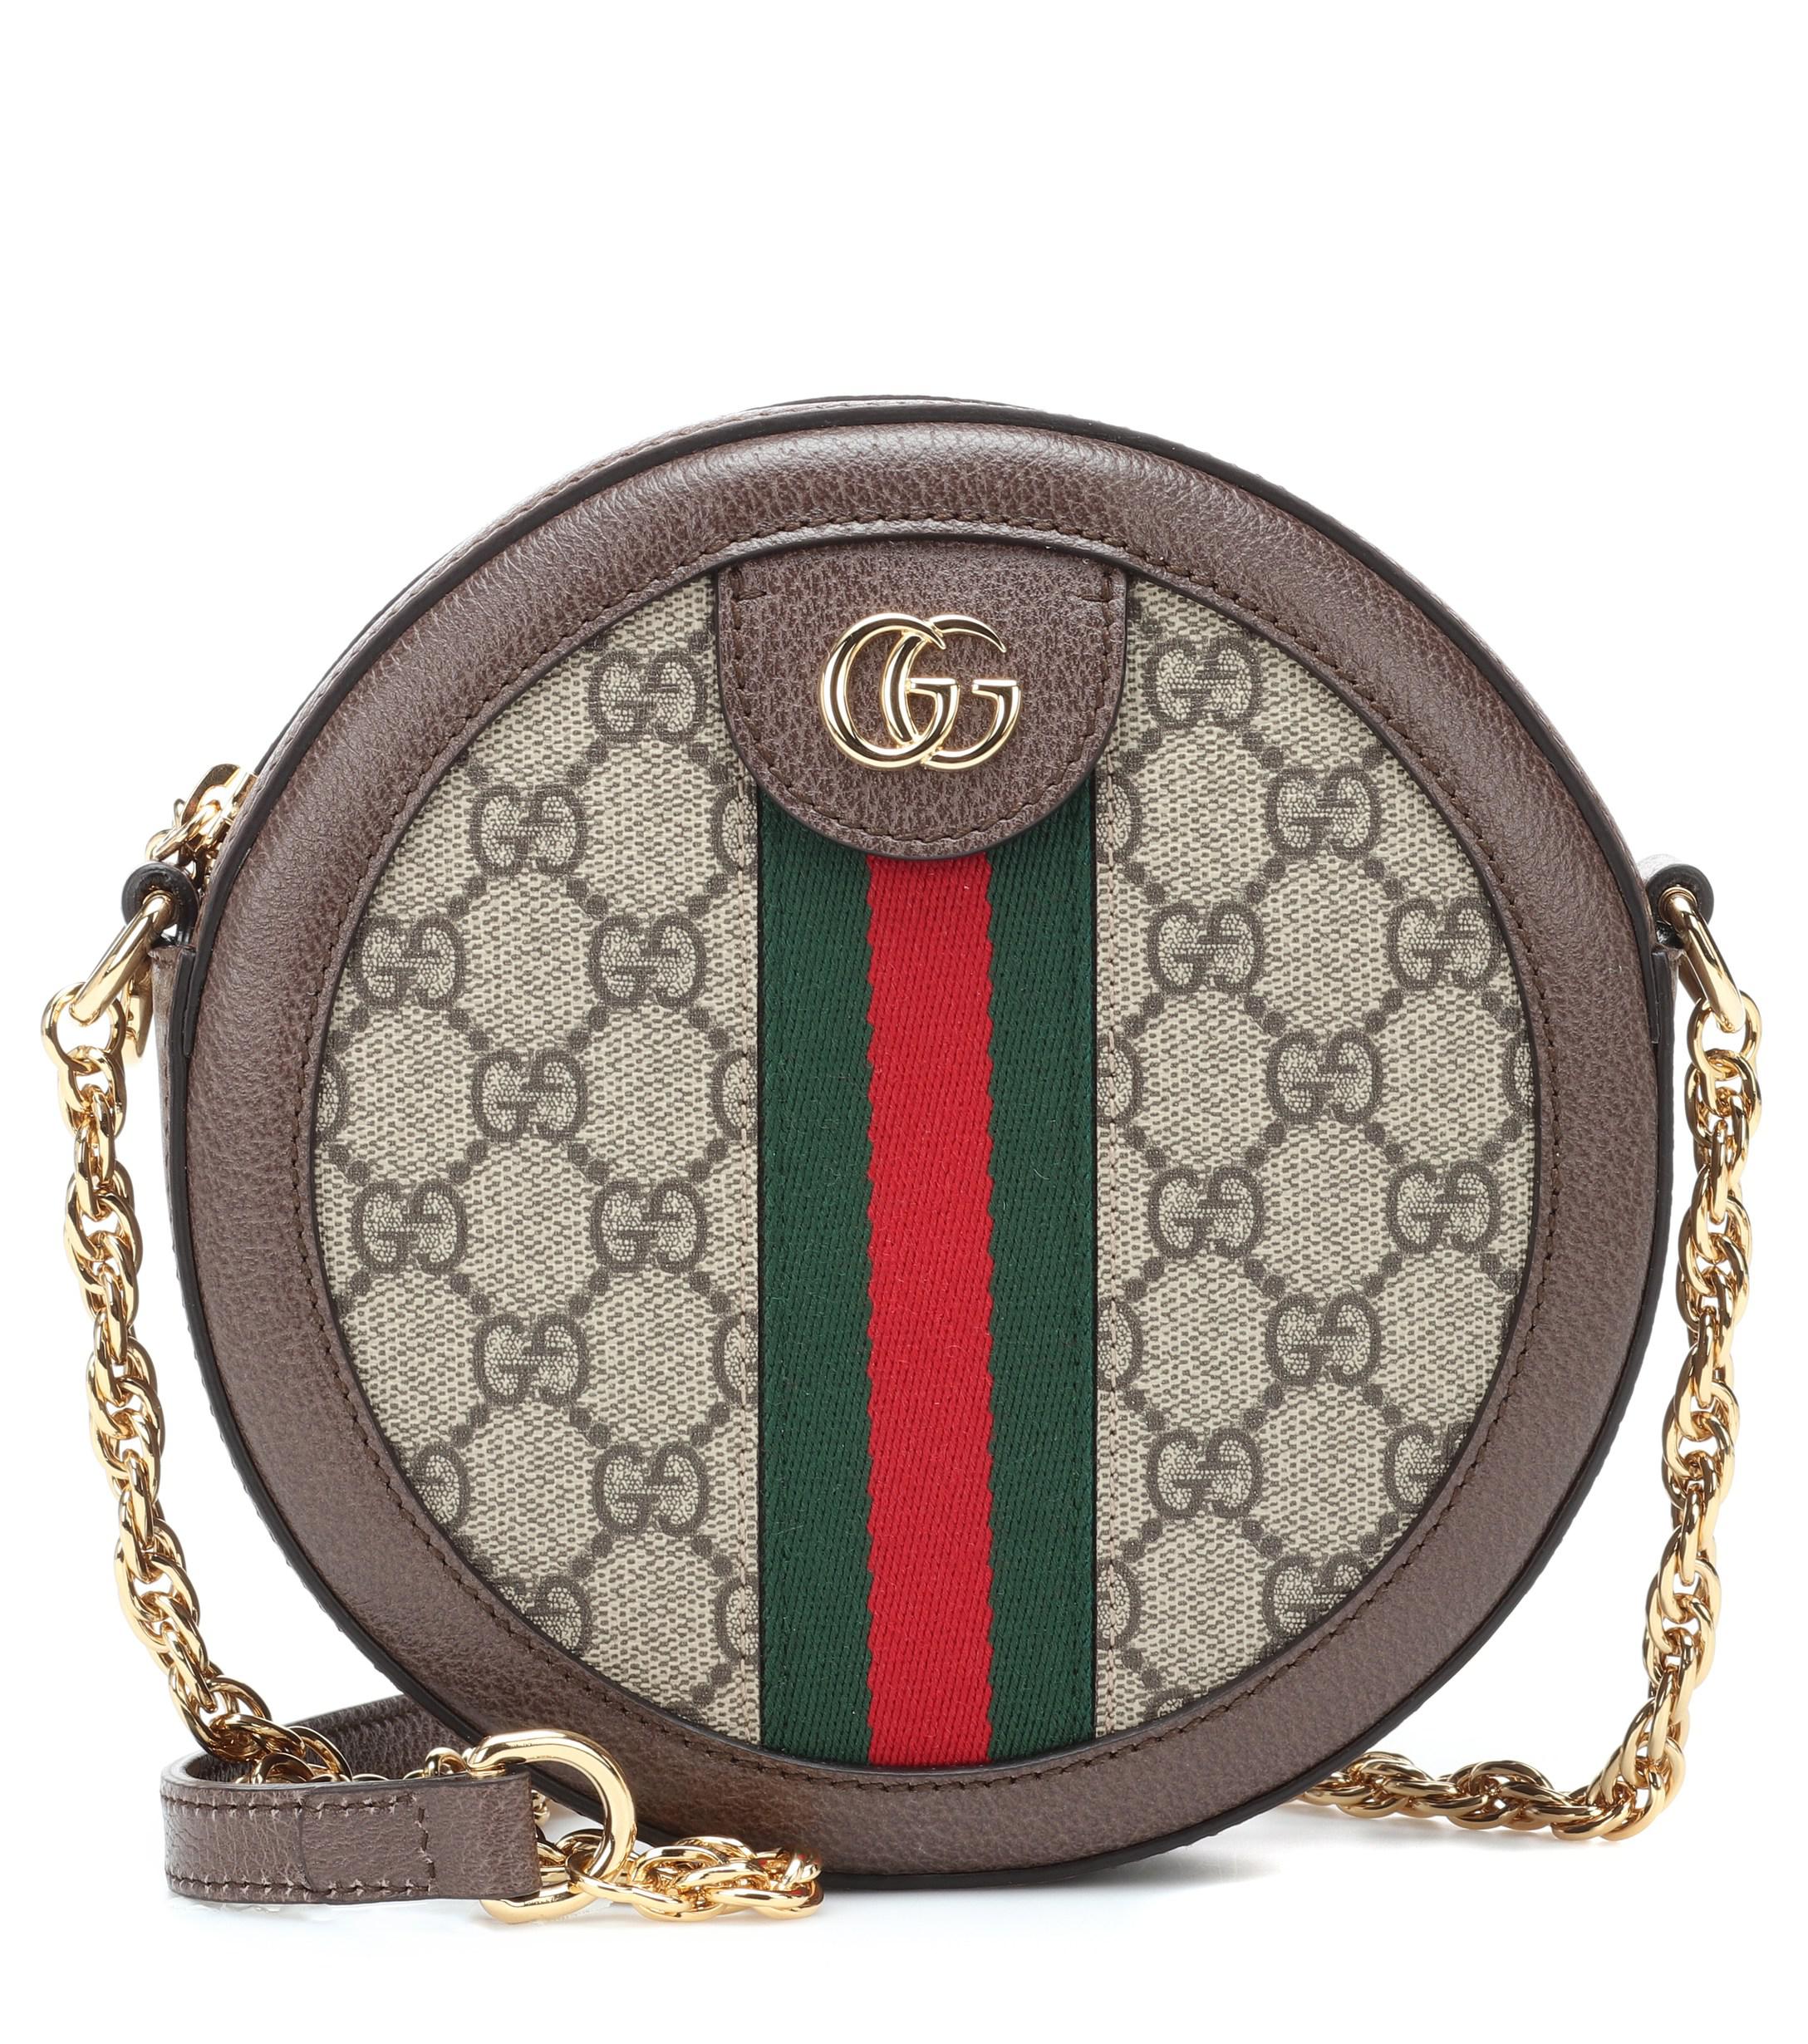 Gucci Ophidia Mini Round Shoulder Bag in Brown - Save 22% - Lyst